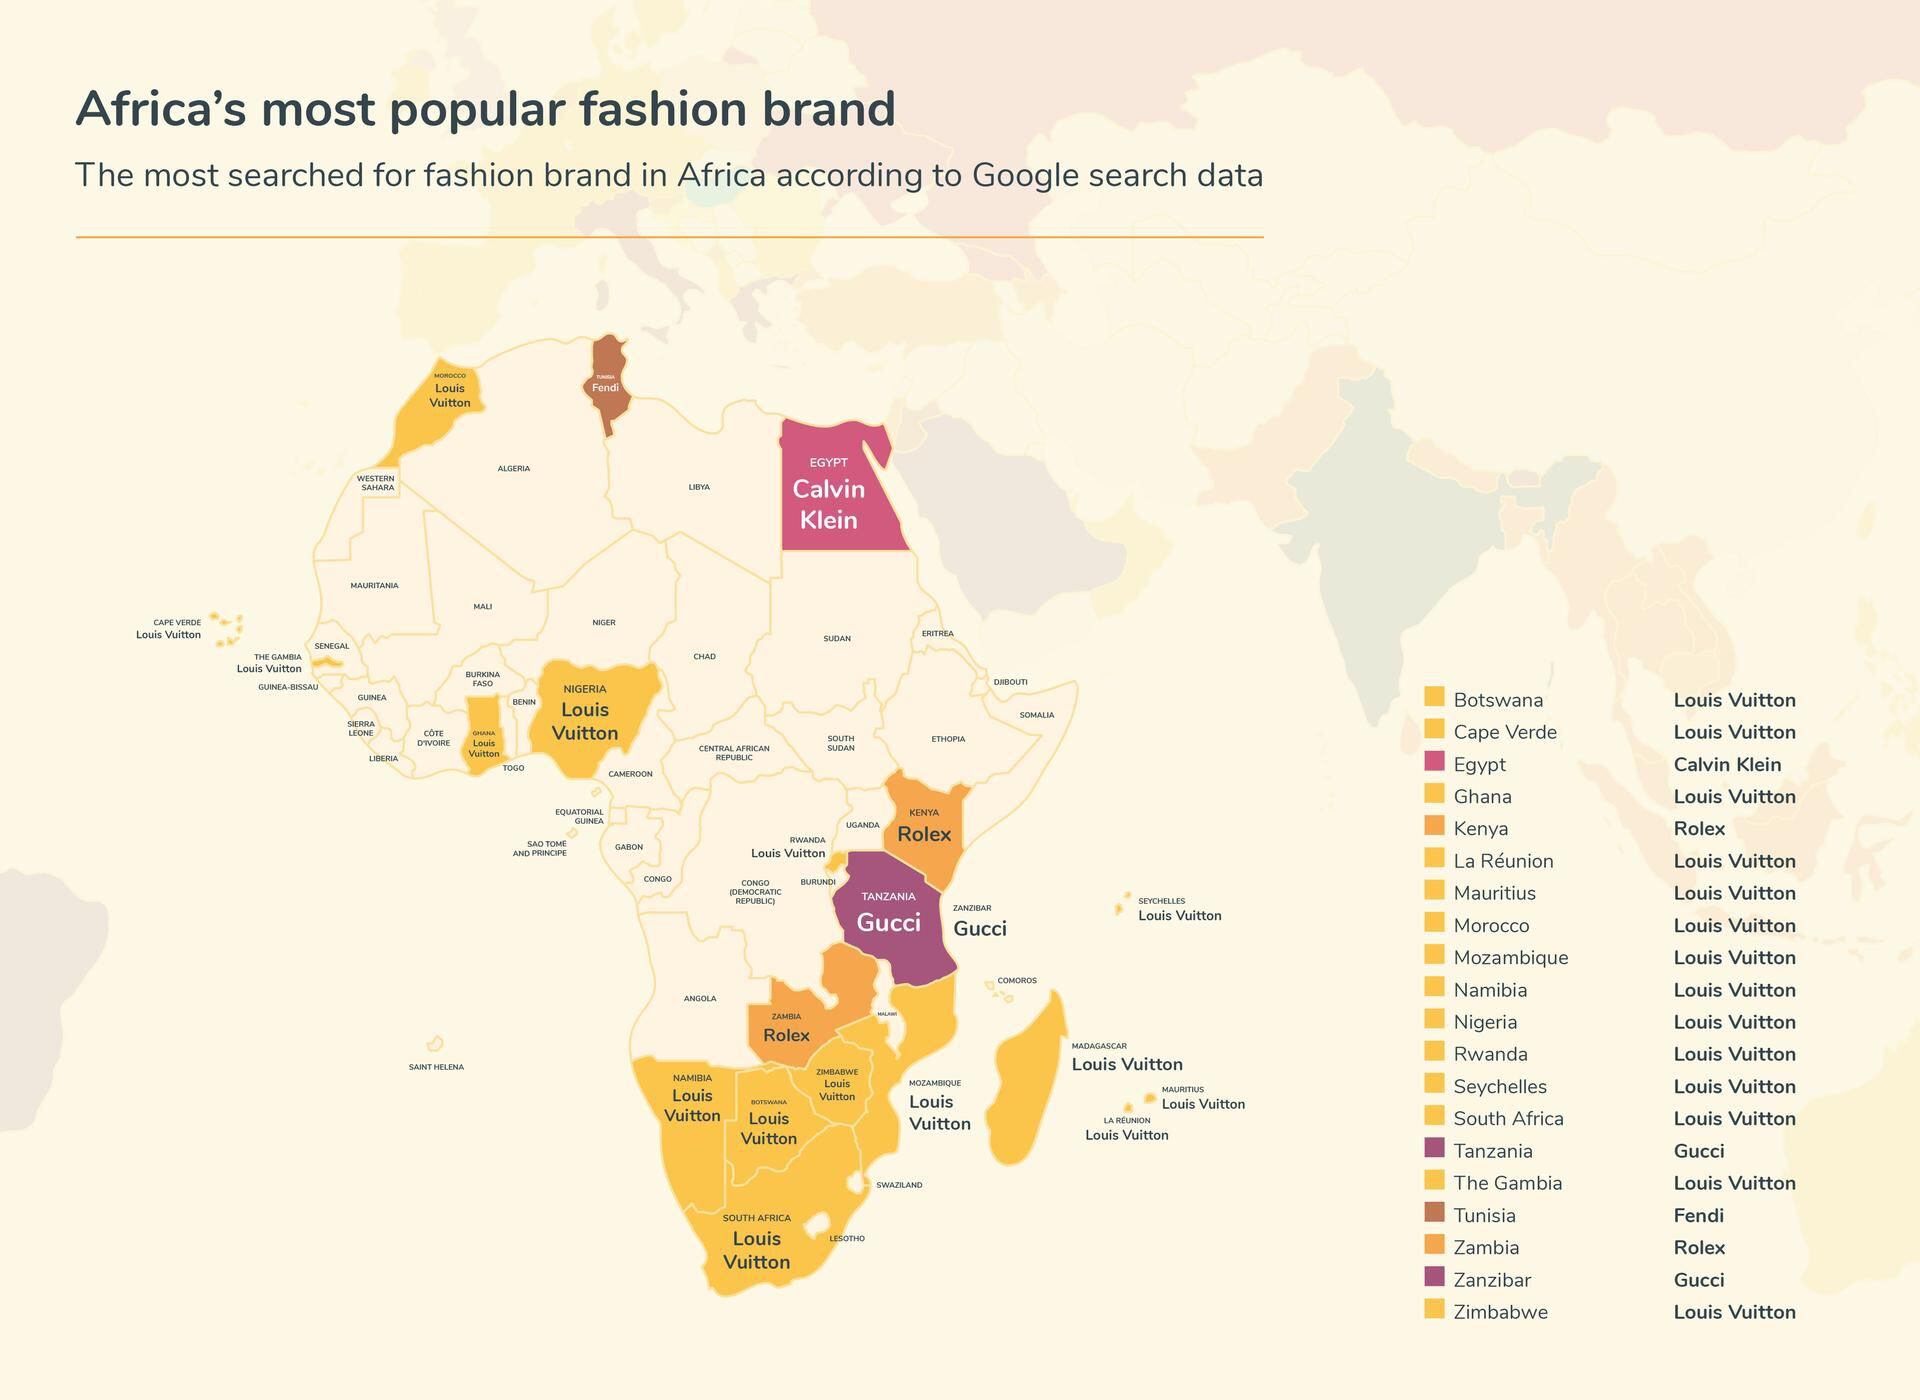 Louis Vuitton is the world's most searched for brand according to Google